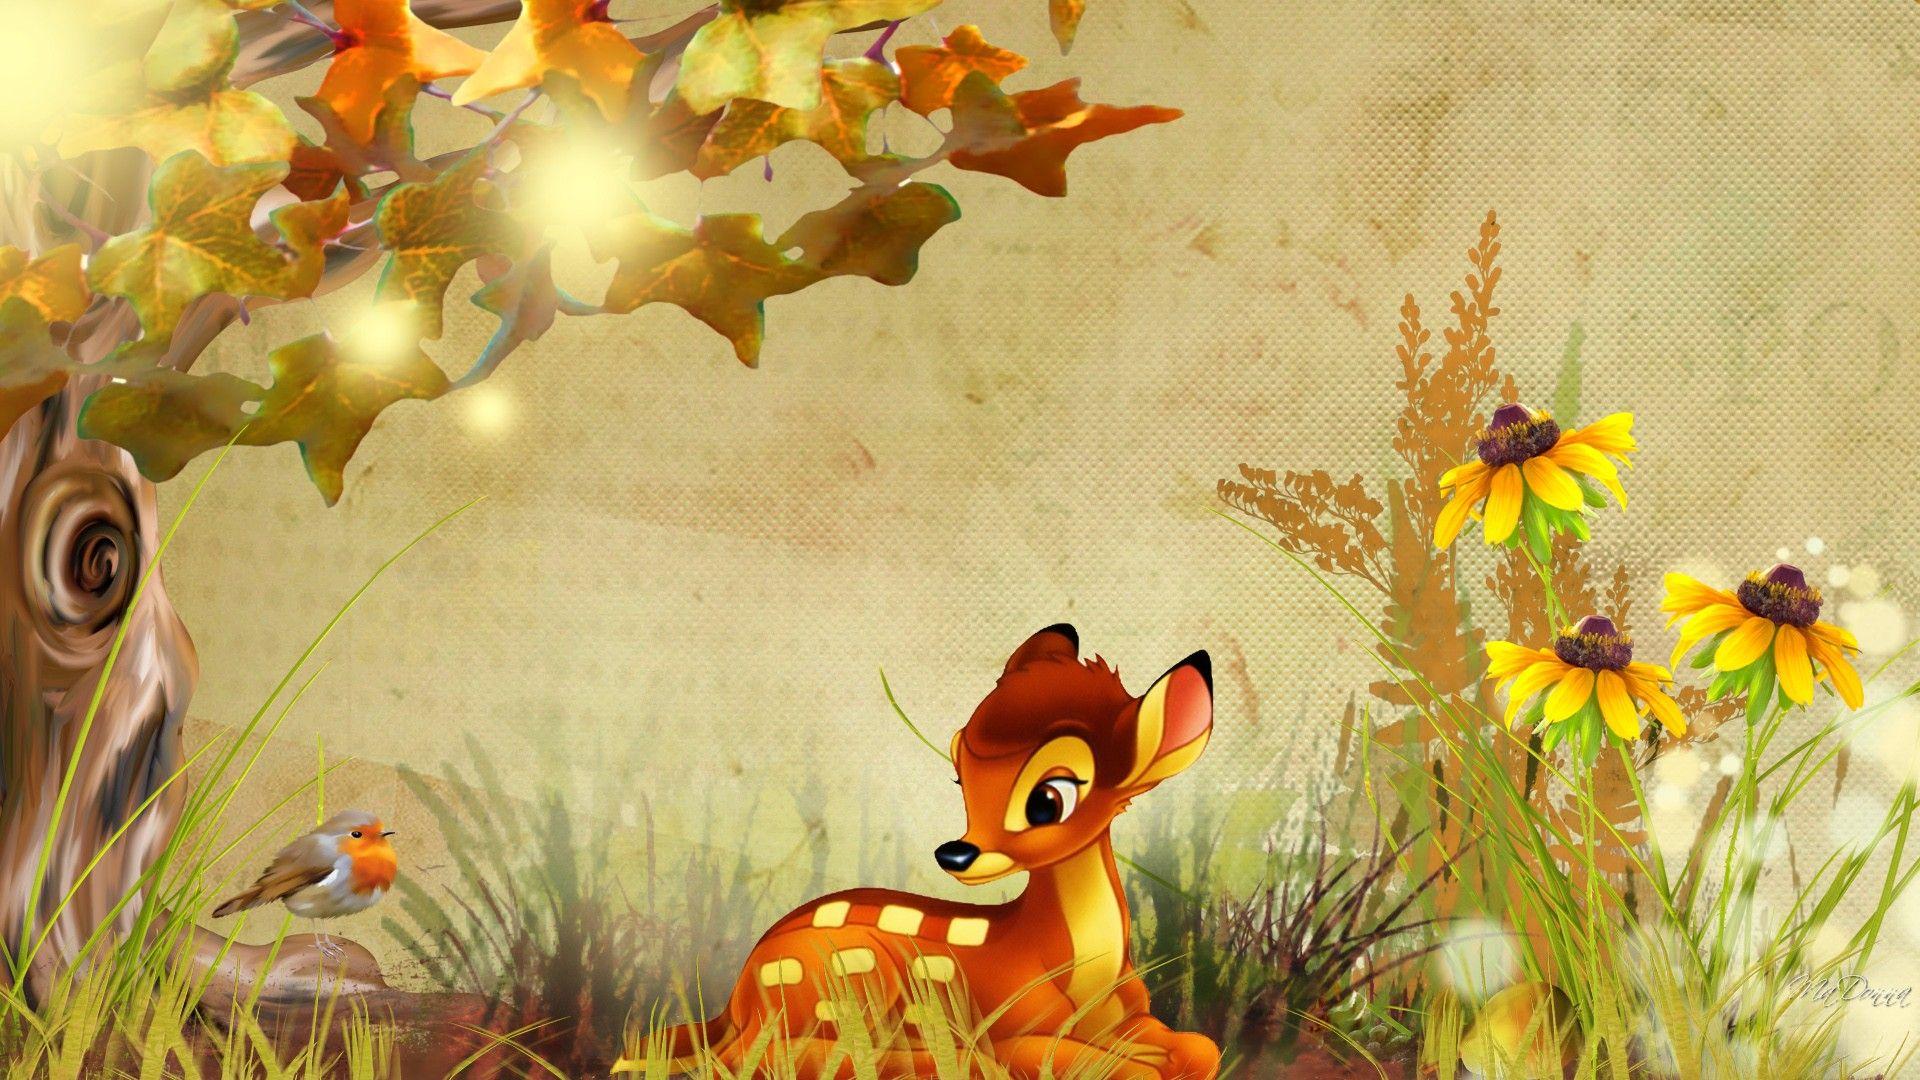 Simply: Fall bambi lights disney fawn grass leaves